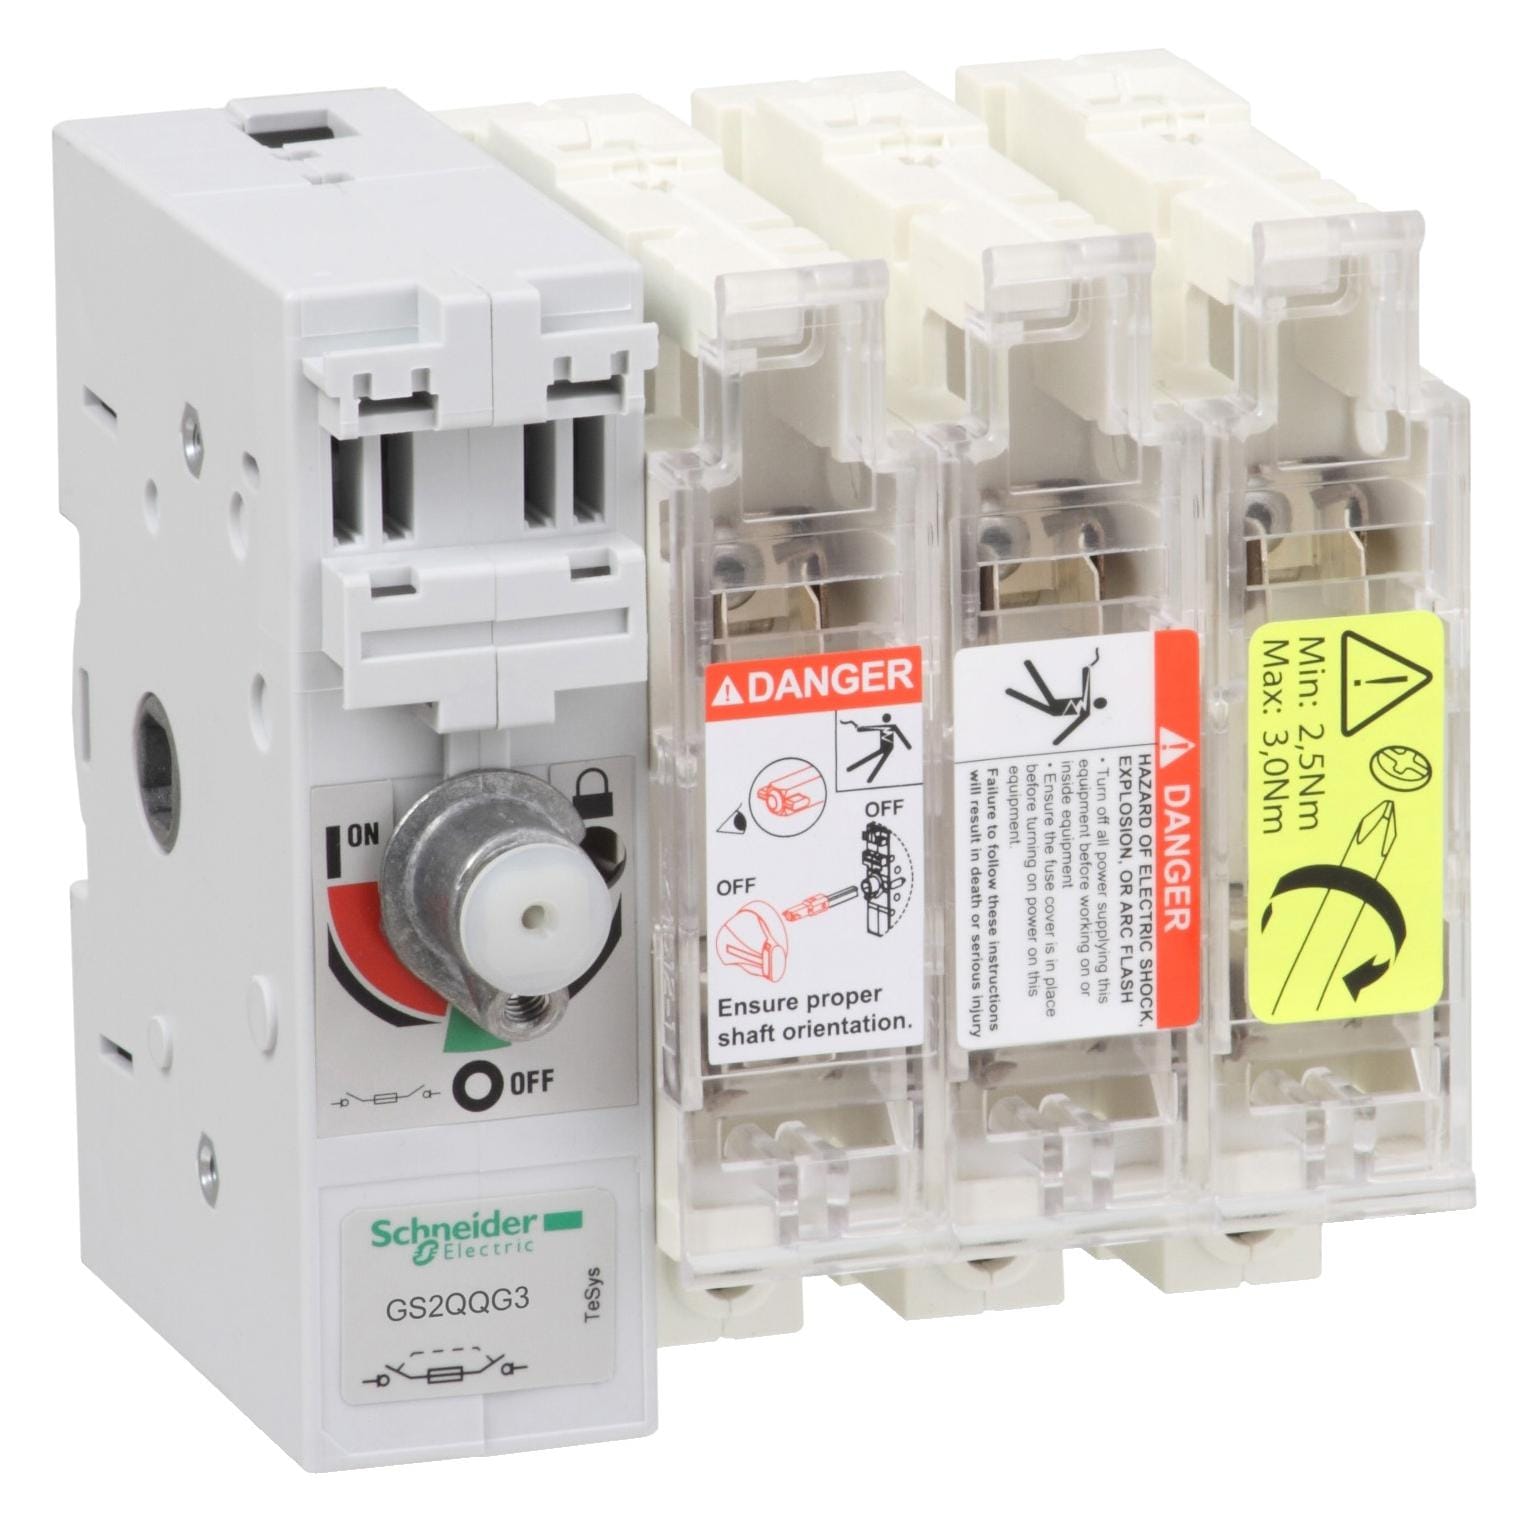 SCHNEIDER ELECTRIC Fused GS2QQG3 FUSE DISCONNECT SW. 3X 400A 2 SCHNEIDER ELECTRIC 3406297 GS2QQG3